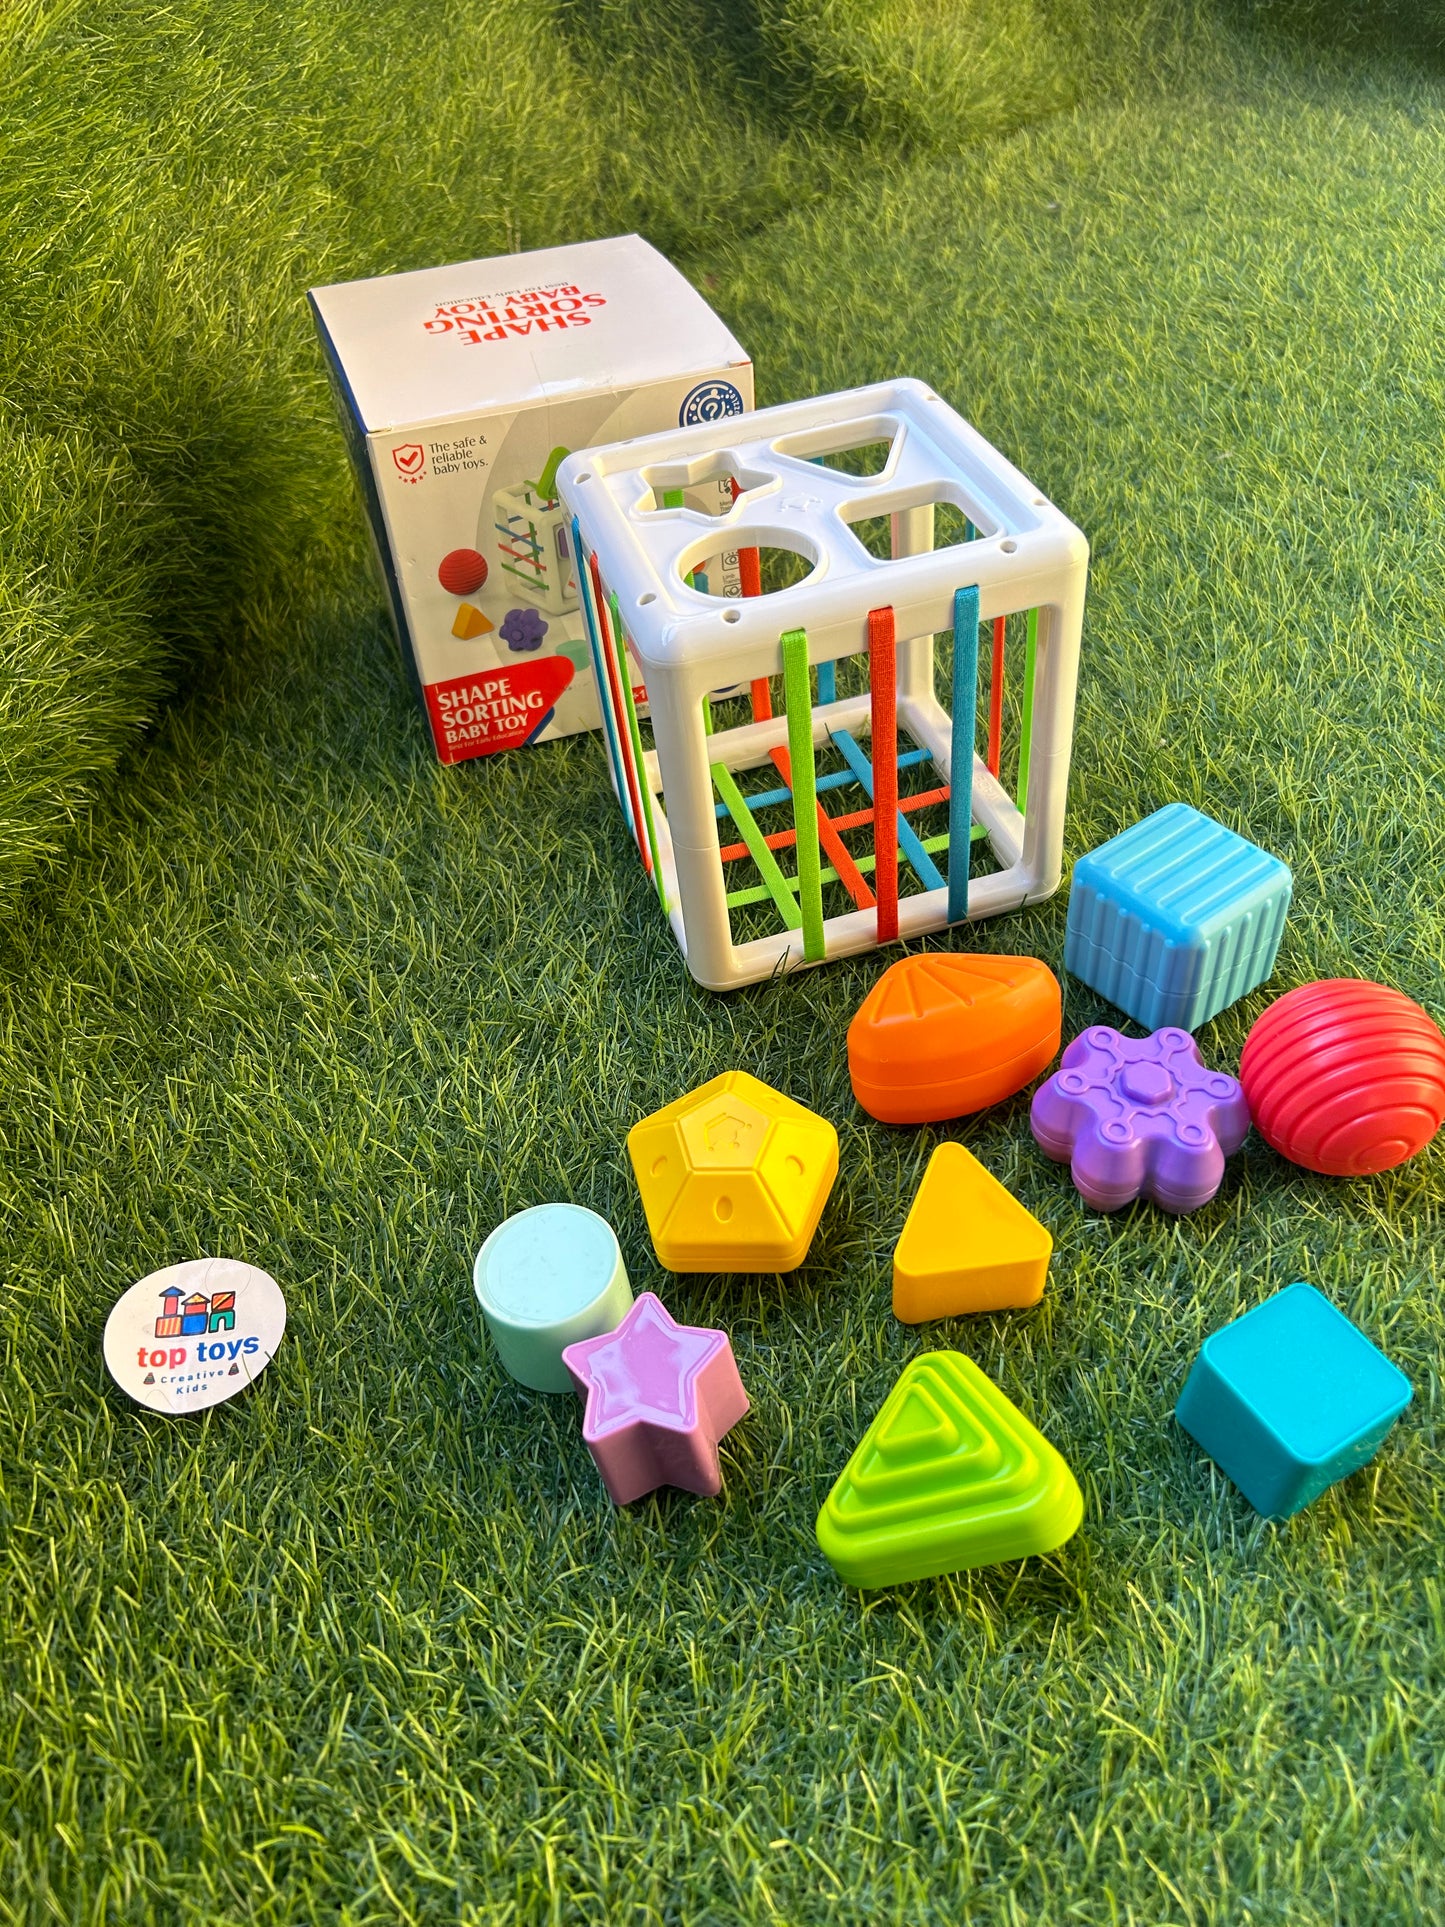 Shape sorting baby toy